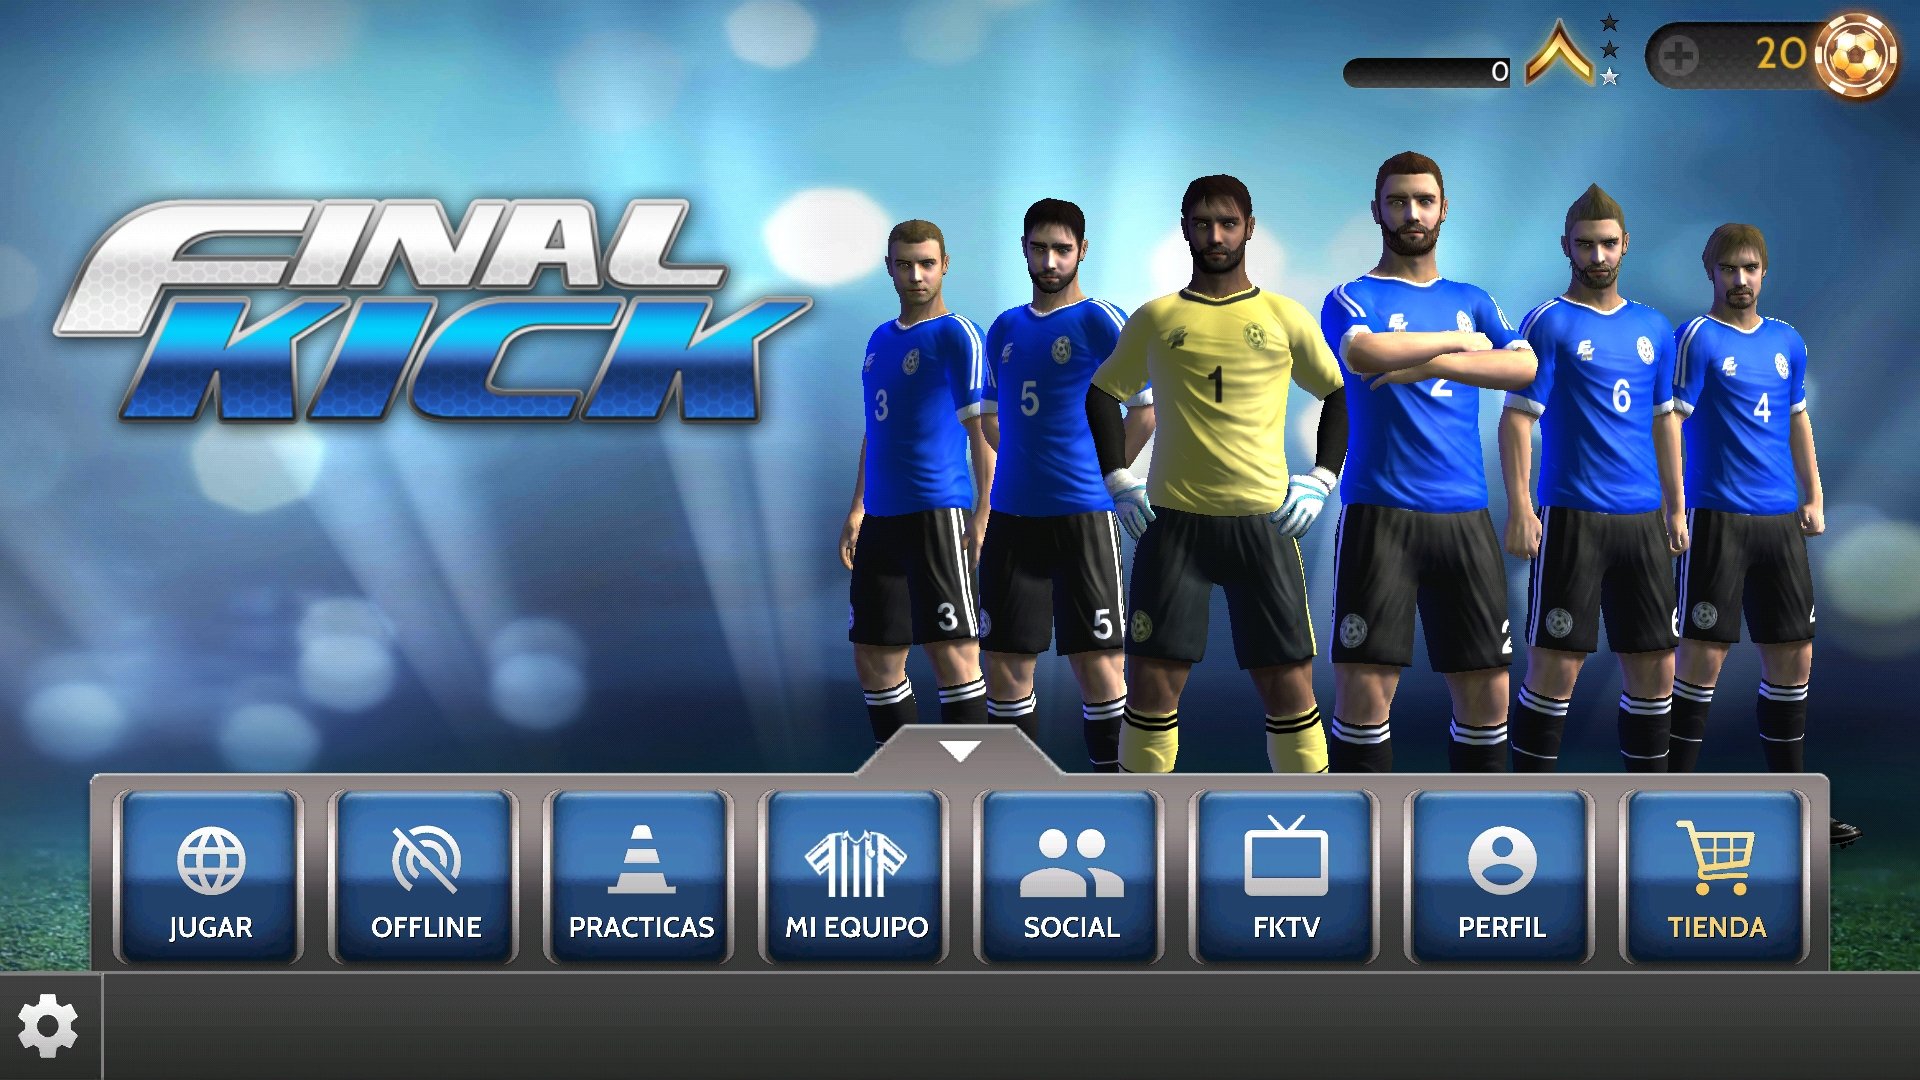 Download Final kick: Online football Android latest Version